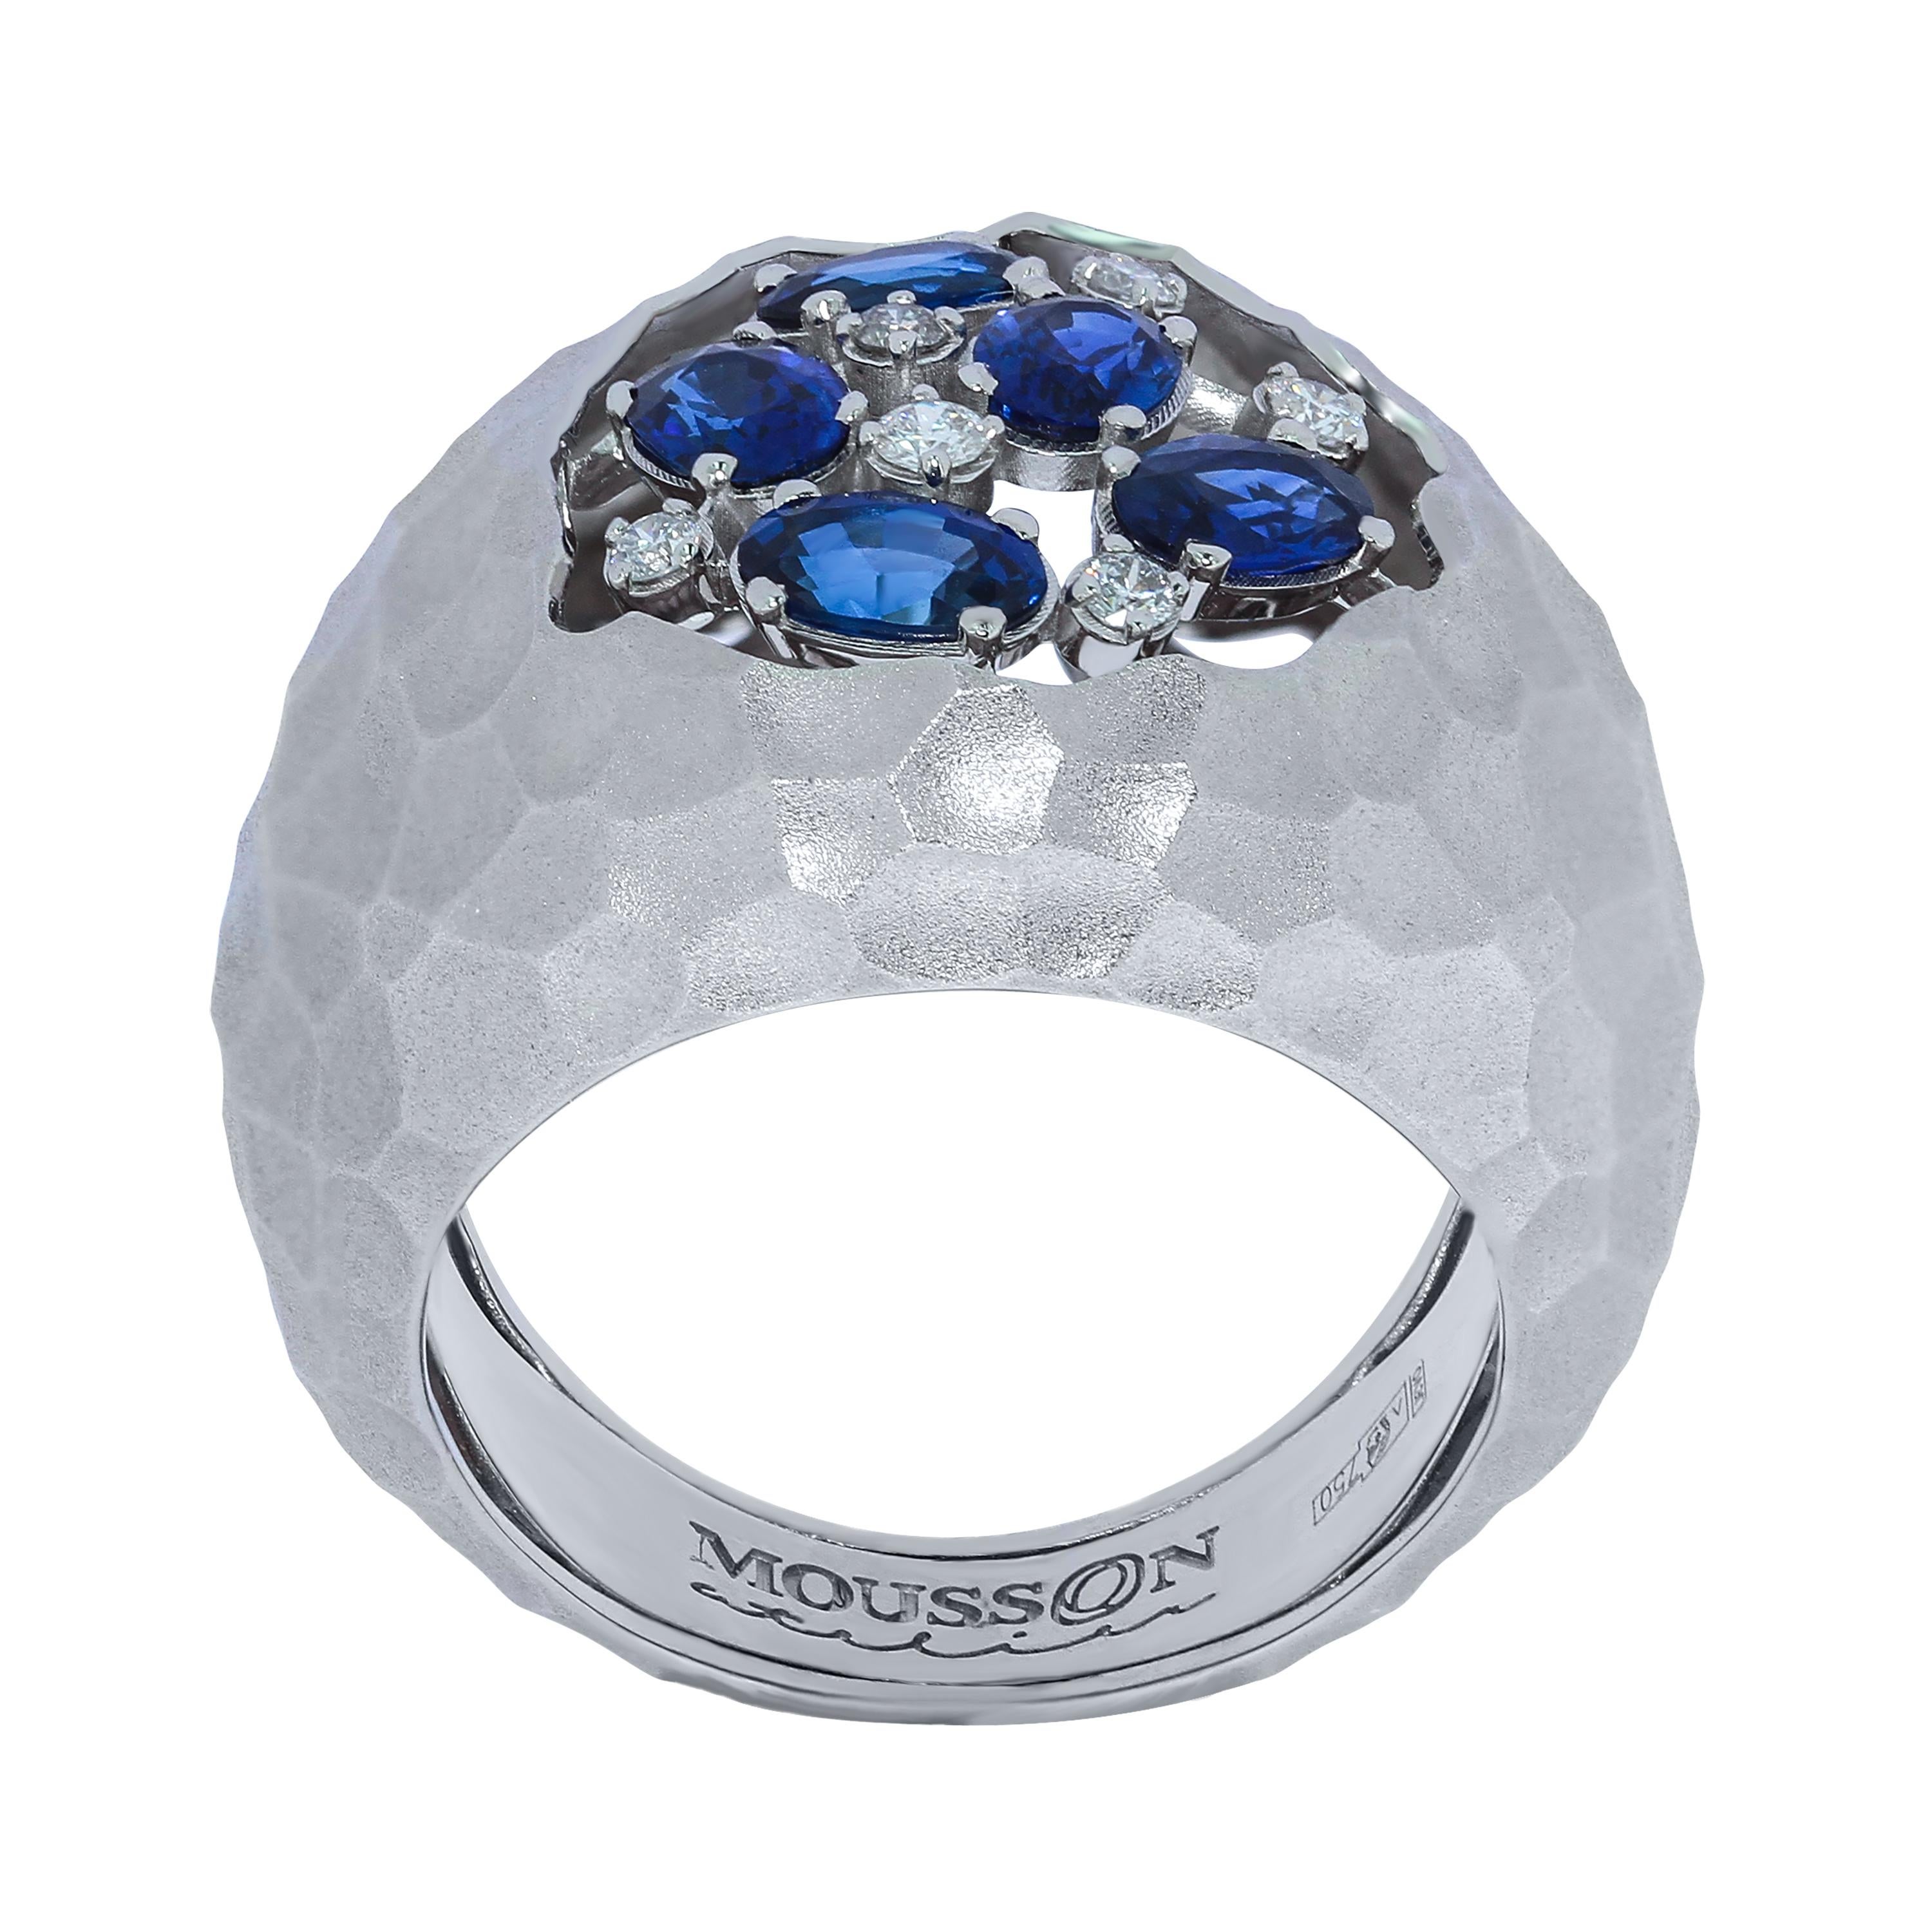 Blue Sapphires Diamonds 18 Karat White Gold Small Oasis Ring
Hot desert - nothing alive around. But it is necessary to appear a sip of water, and life awakens. It was the deserts that inspired our designers to create this Ring. Incredibly dry, the